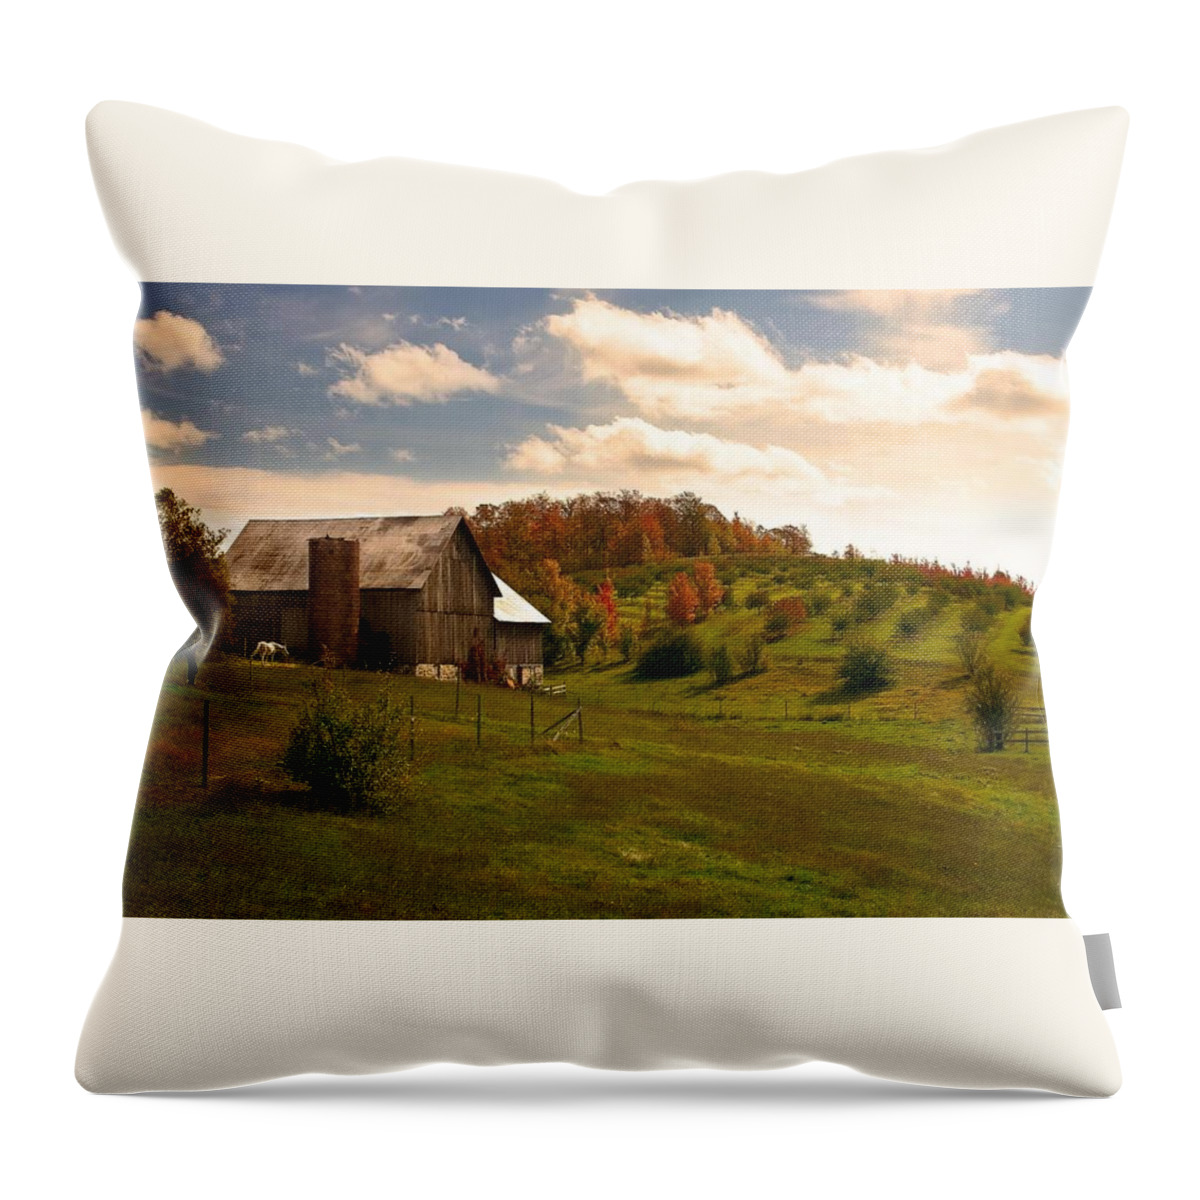 Farm Throw Pillow featuring the photograph Farm #2 by Jackie Russo